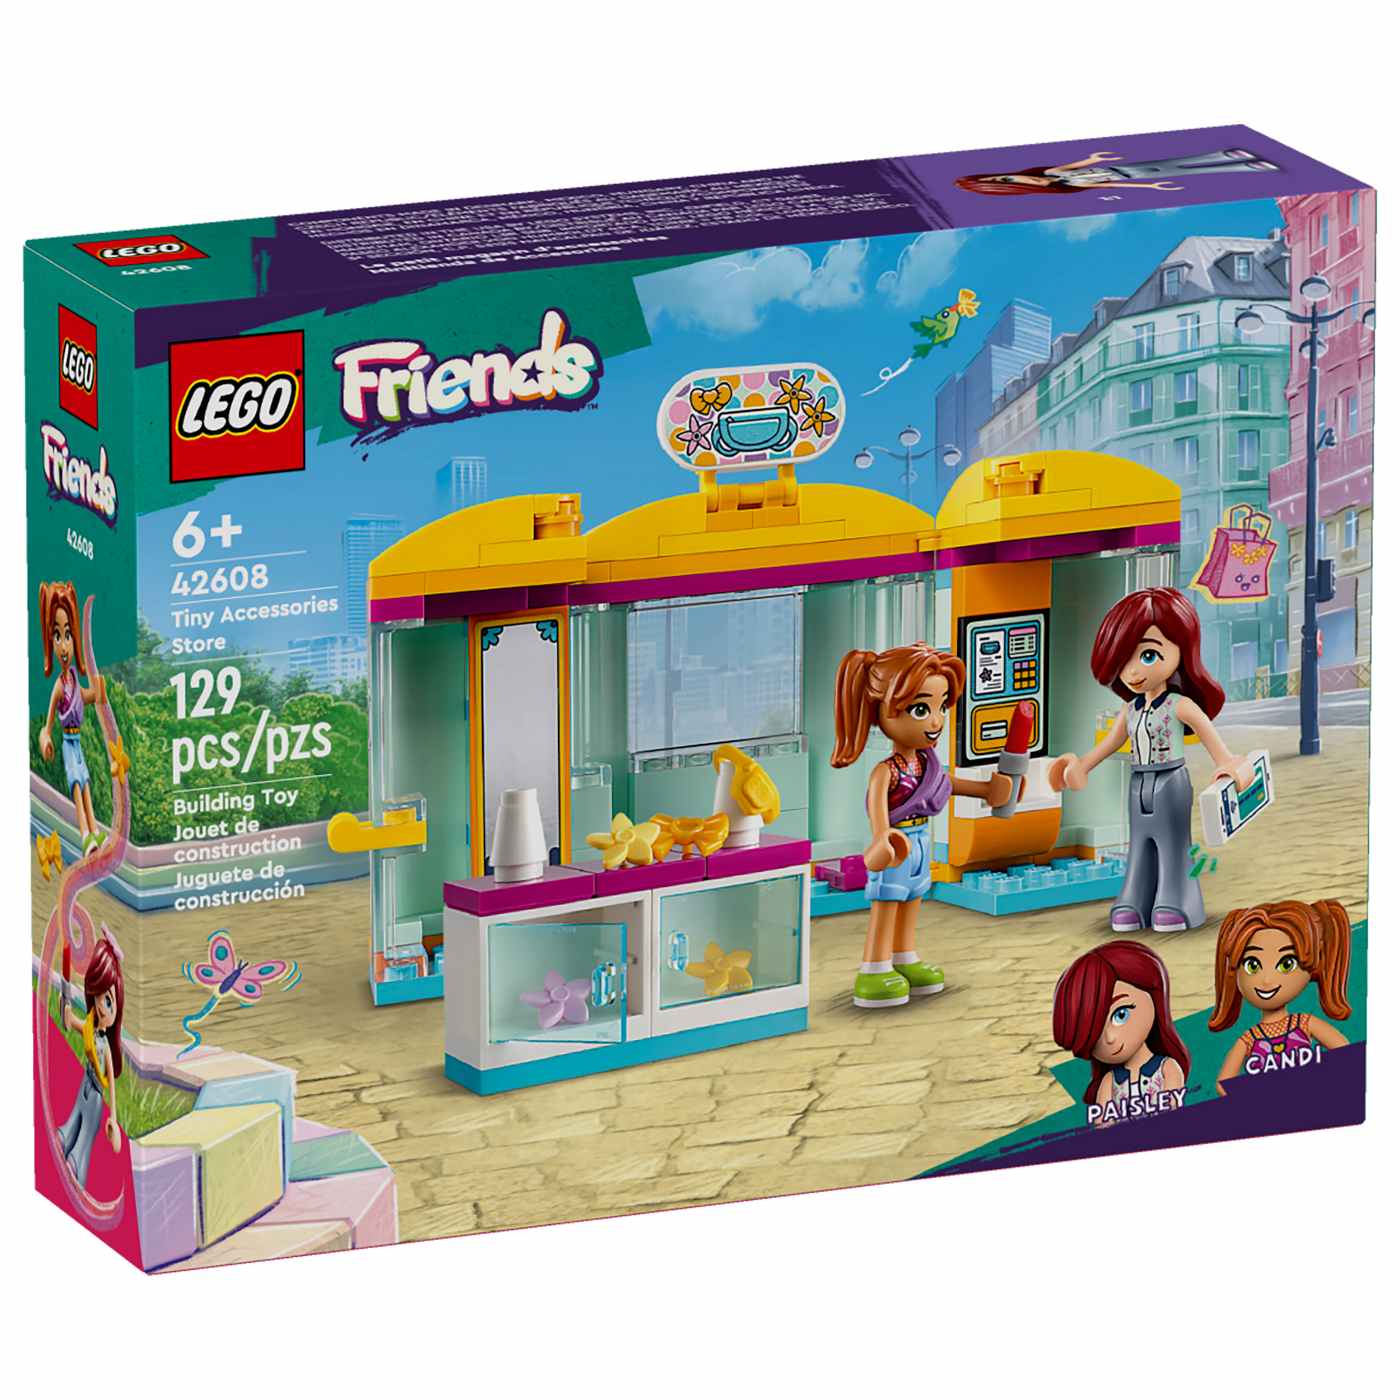 LEGO Friends Tiny Accessory Store Set; image 1 of 2